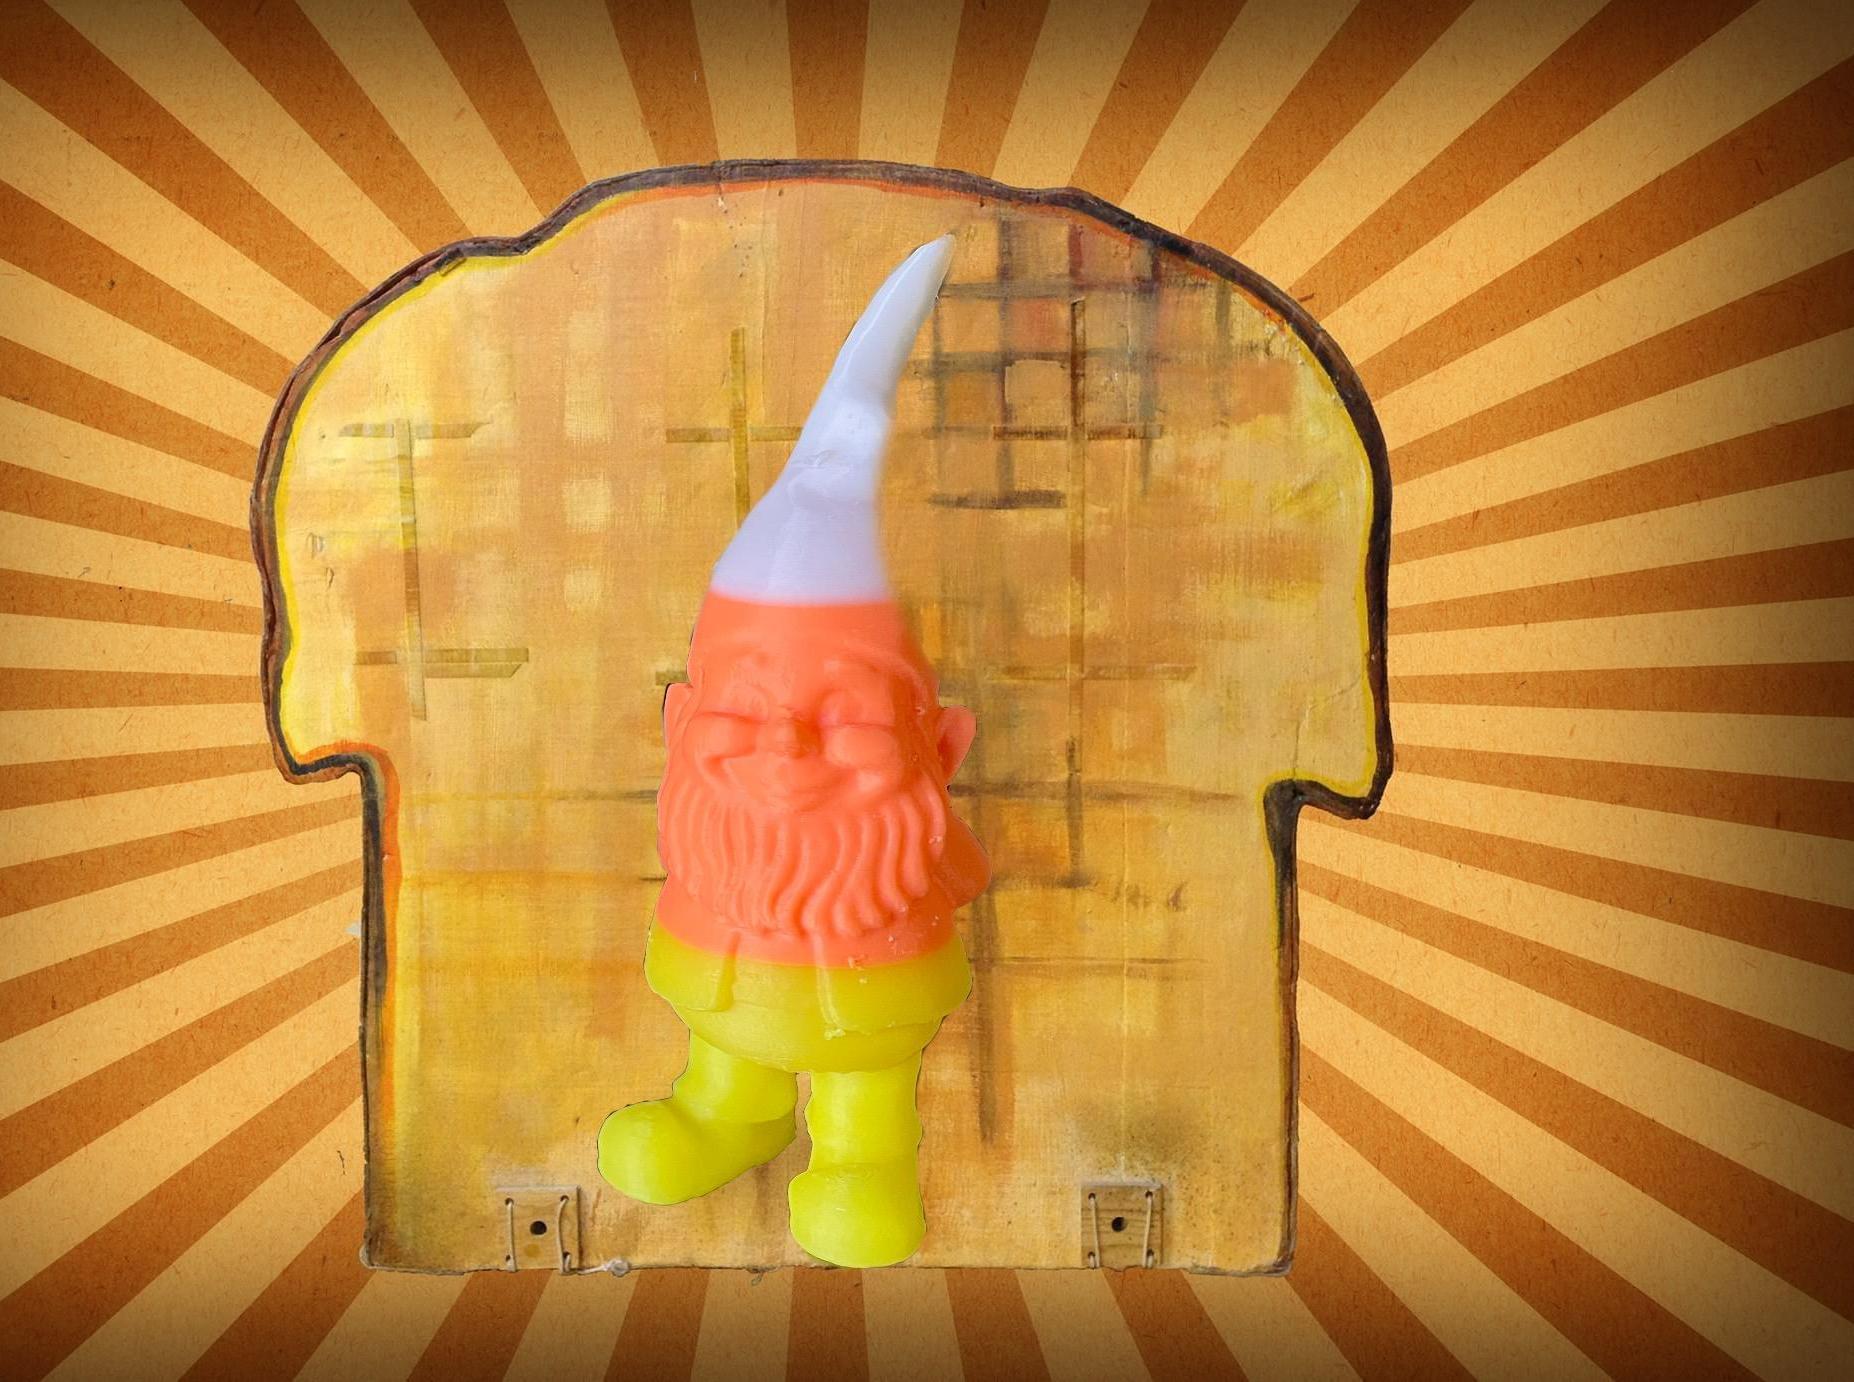 3D Printed Candy Corn Gnome With Filament Splicing